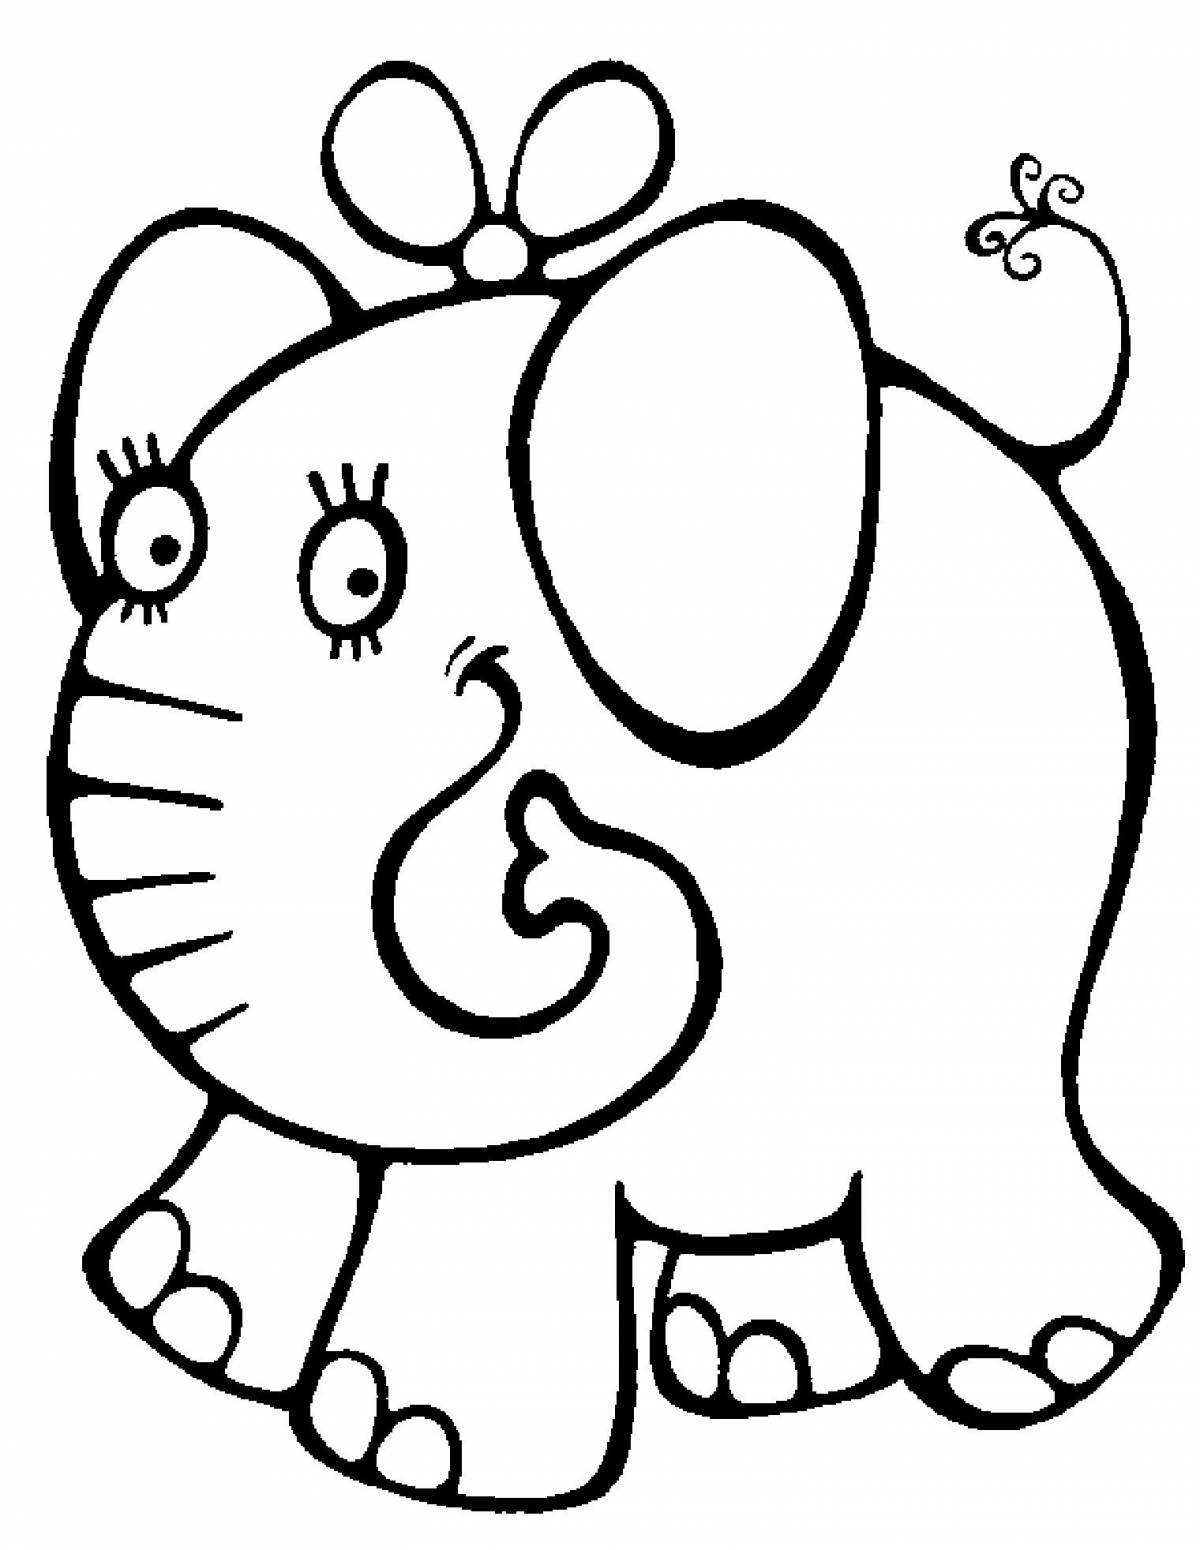 Colourful animal coloring pages for children 2-3 years old